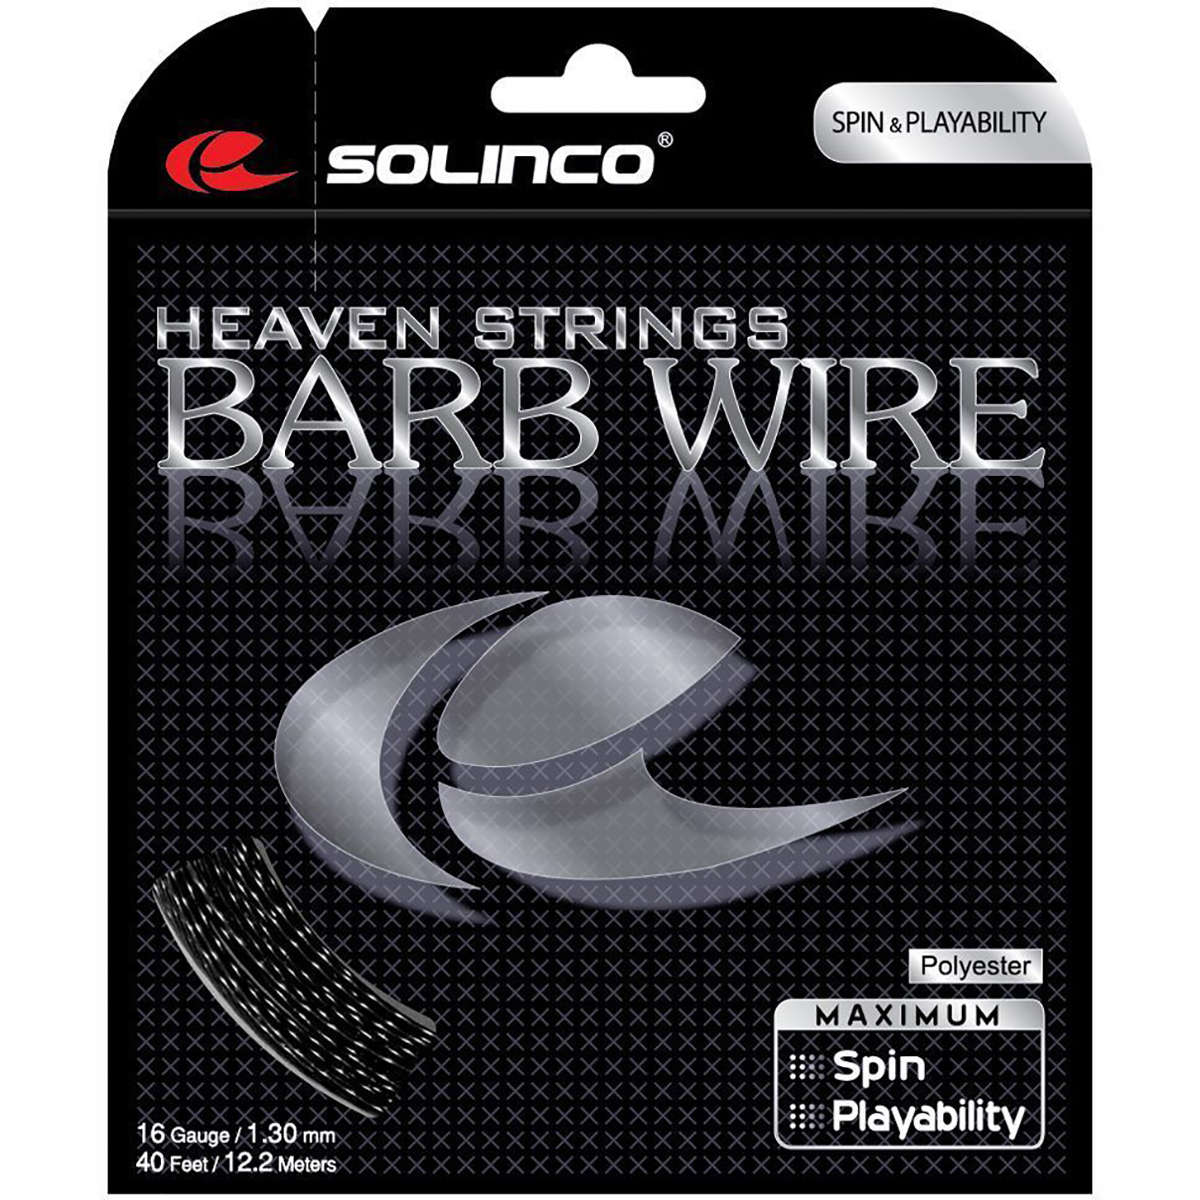 Solinco Barb Wire 16 Tennis String Reel (200m)